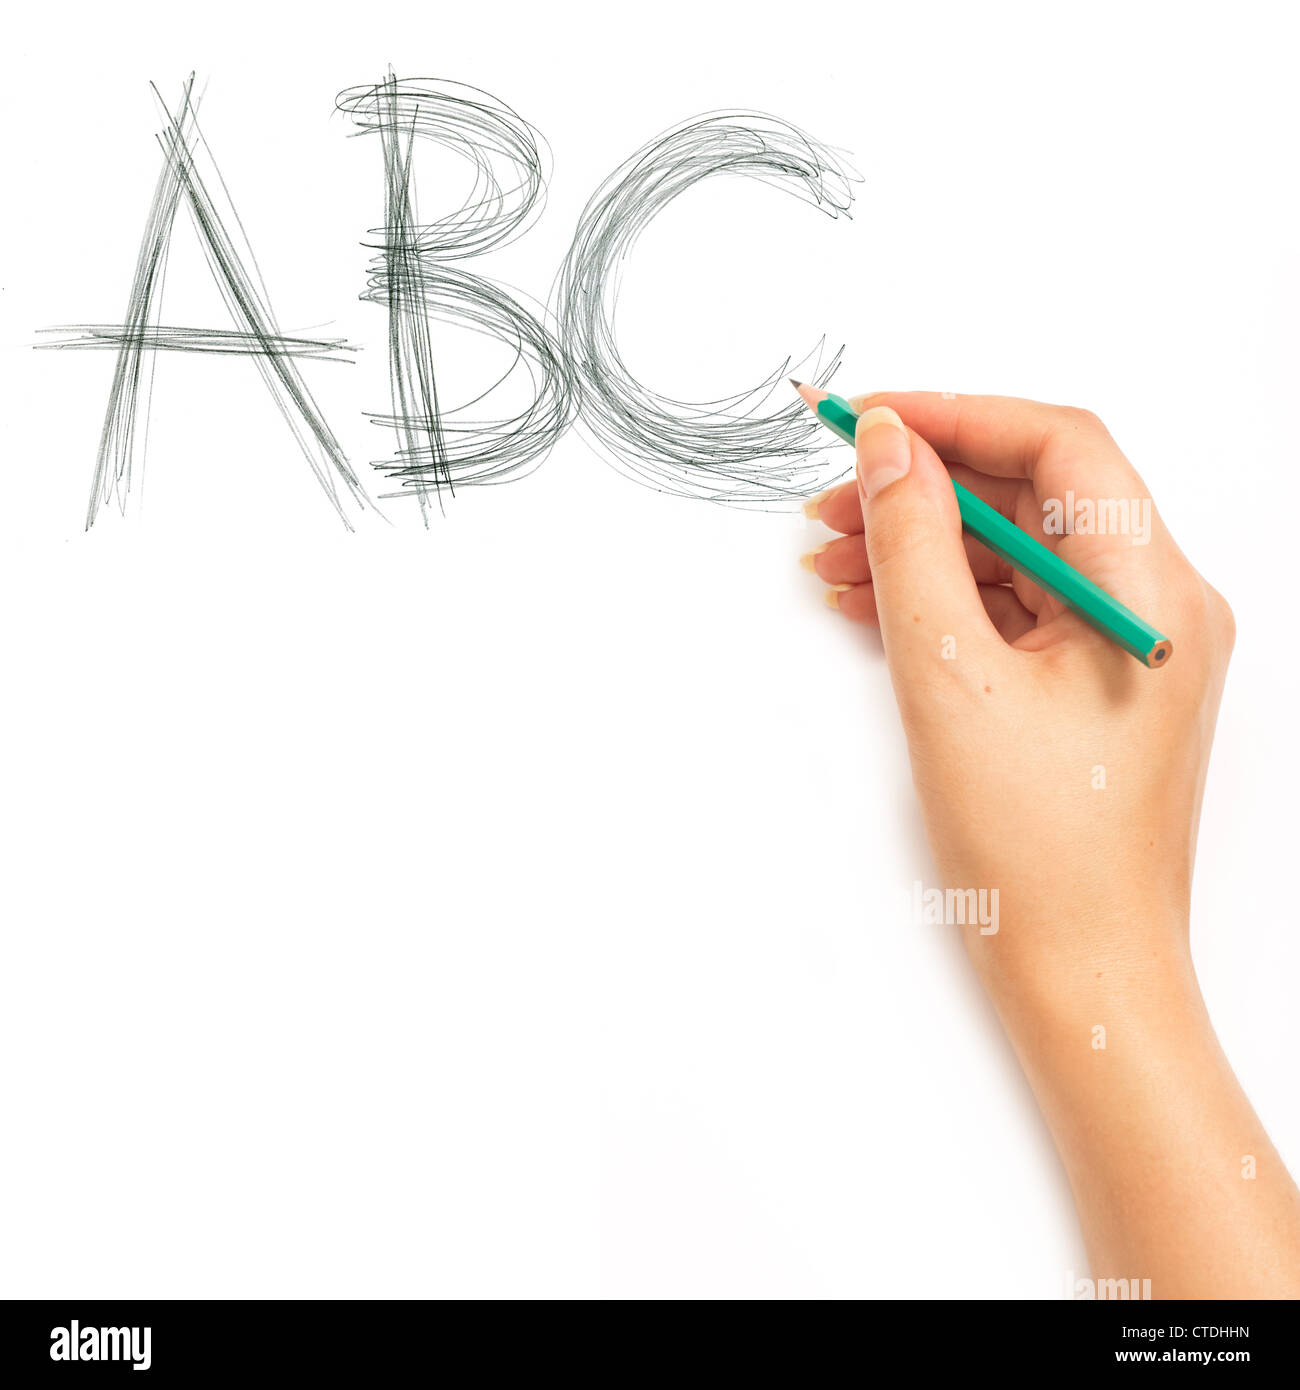 How to Teach Kids to Draw Using the Alphabet  FeltMagnet